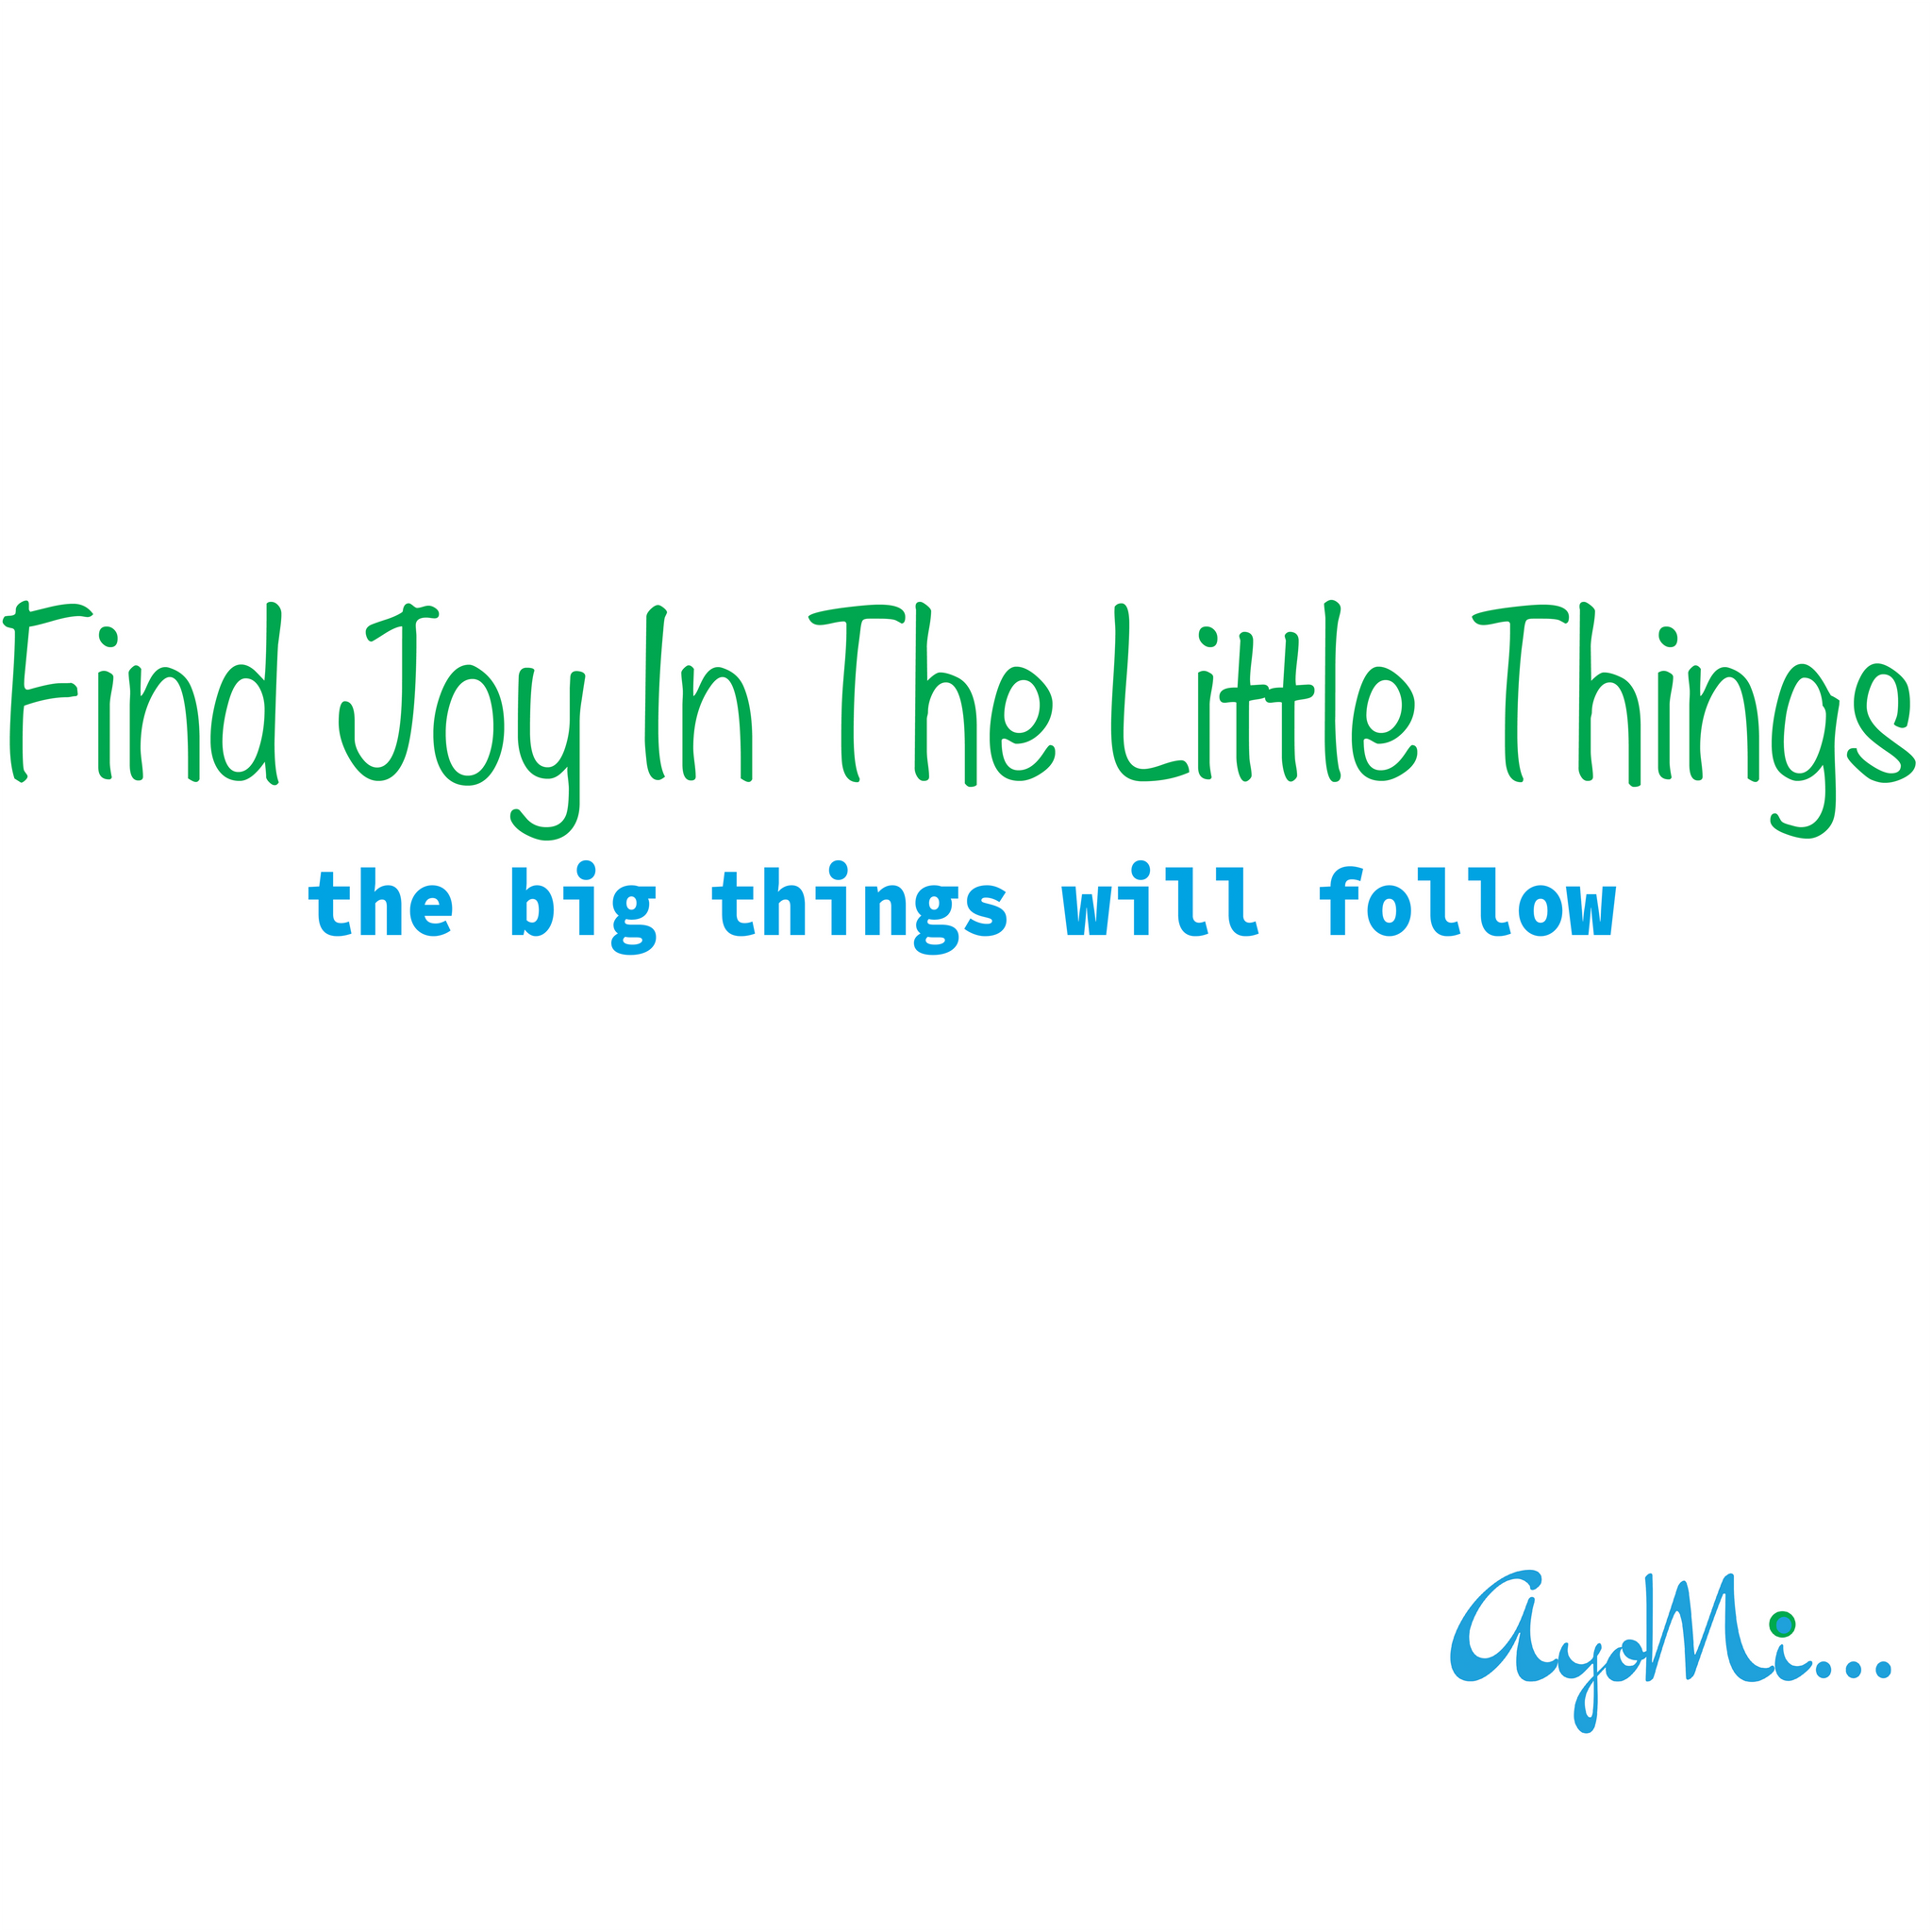 Blue "Find Joy In The Little Things" T-shirt